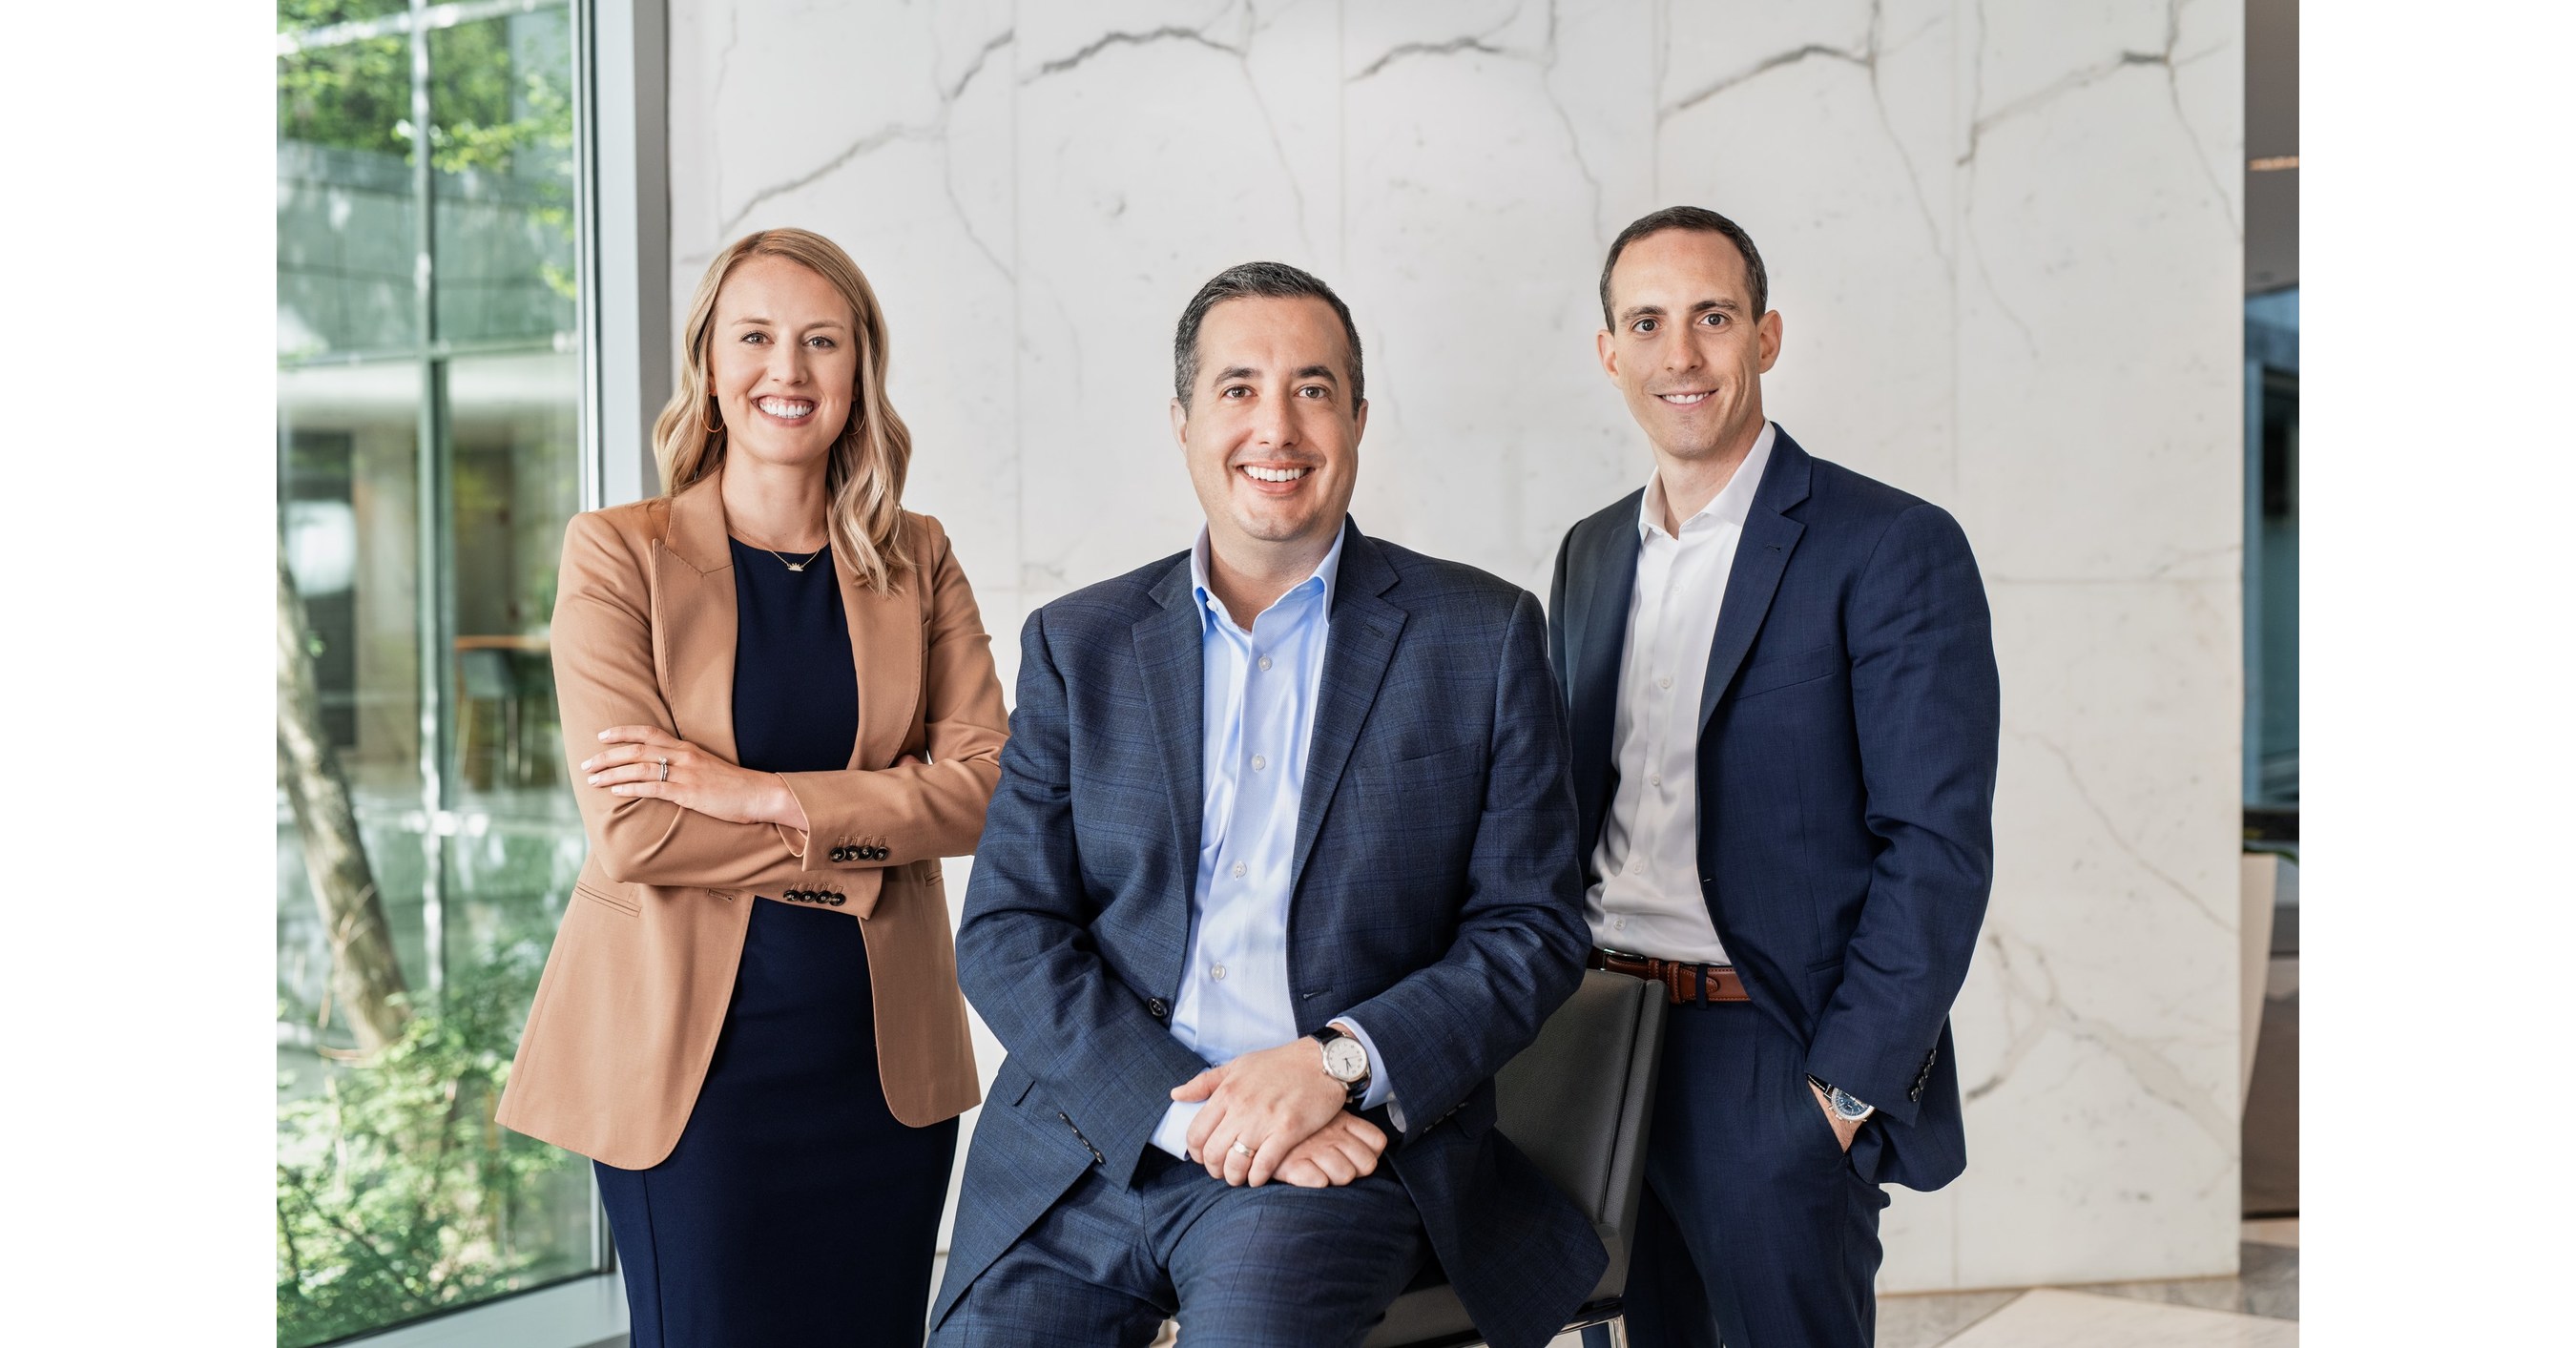 The Lerner Group at Hightower Advisors Promotes Three New Partners